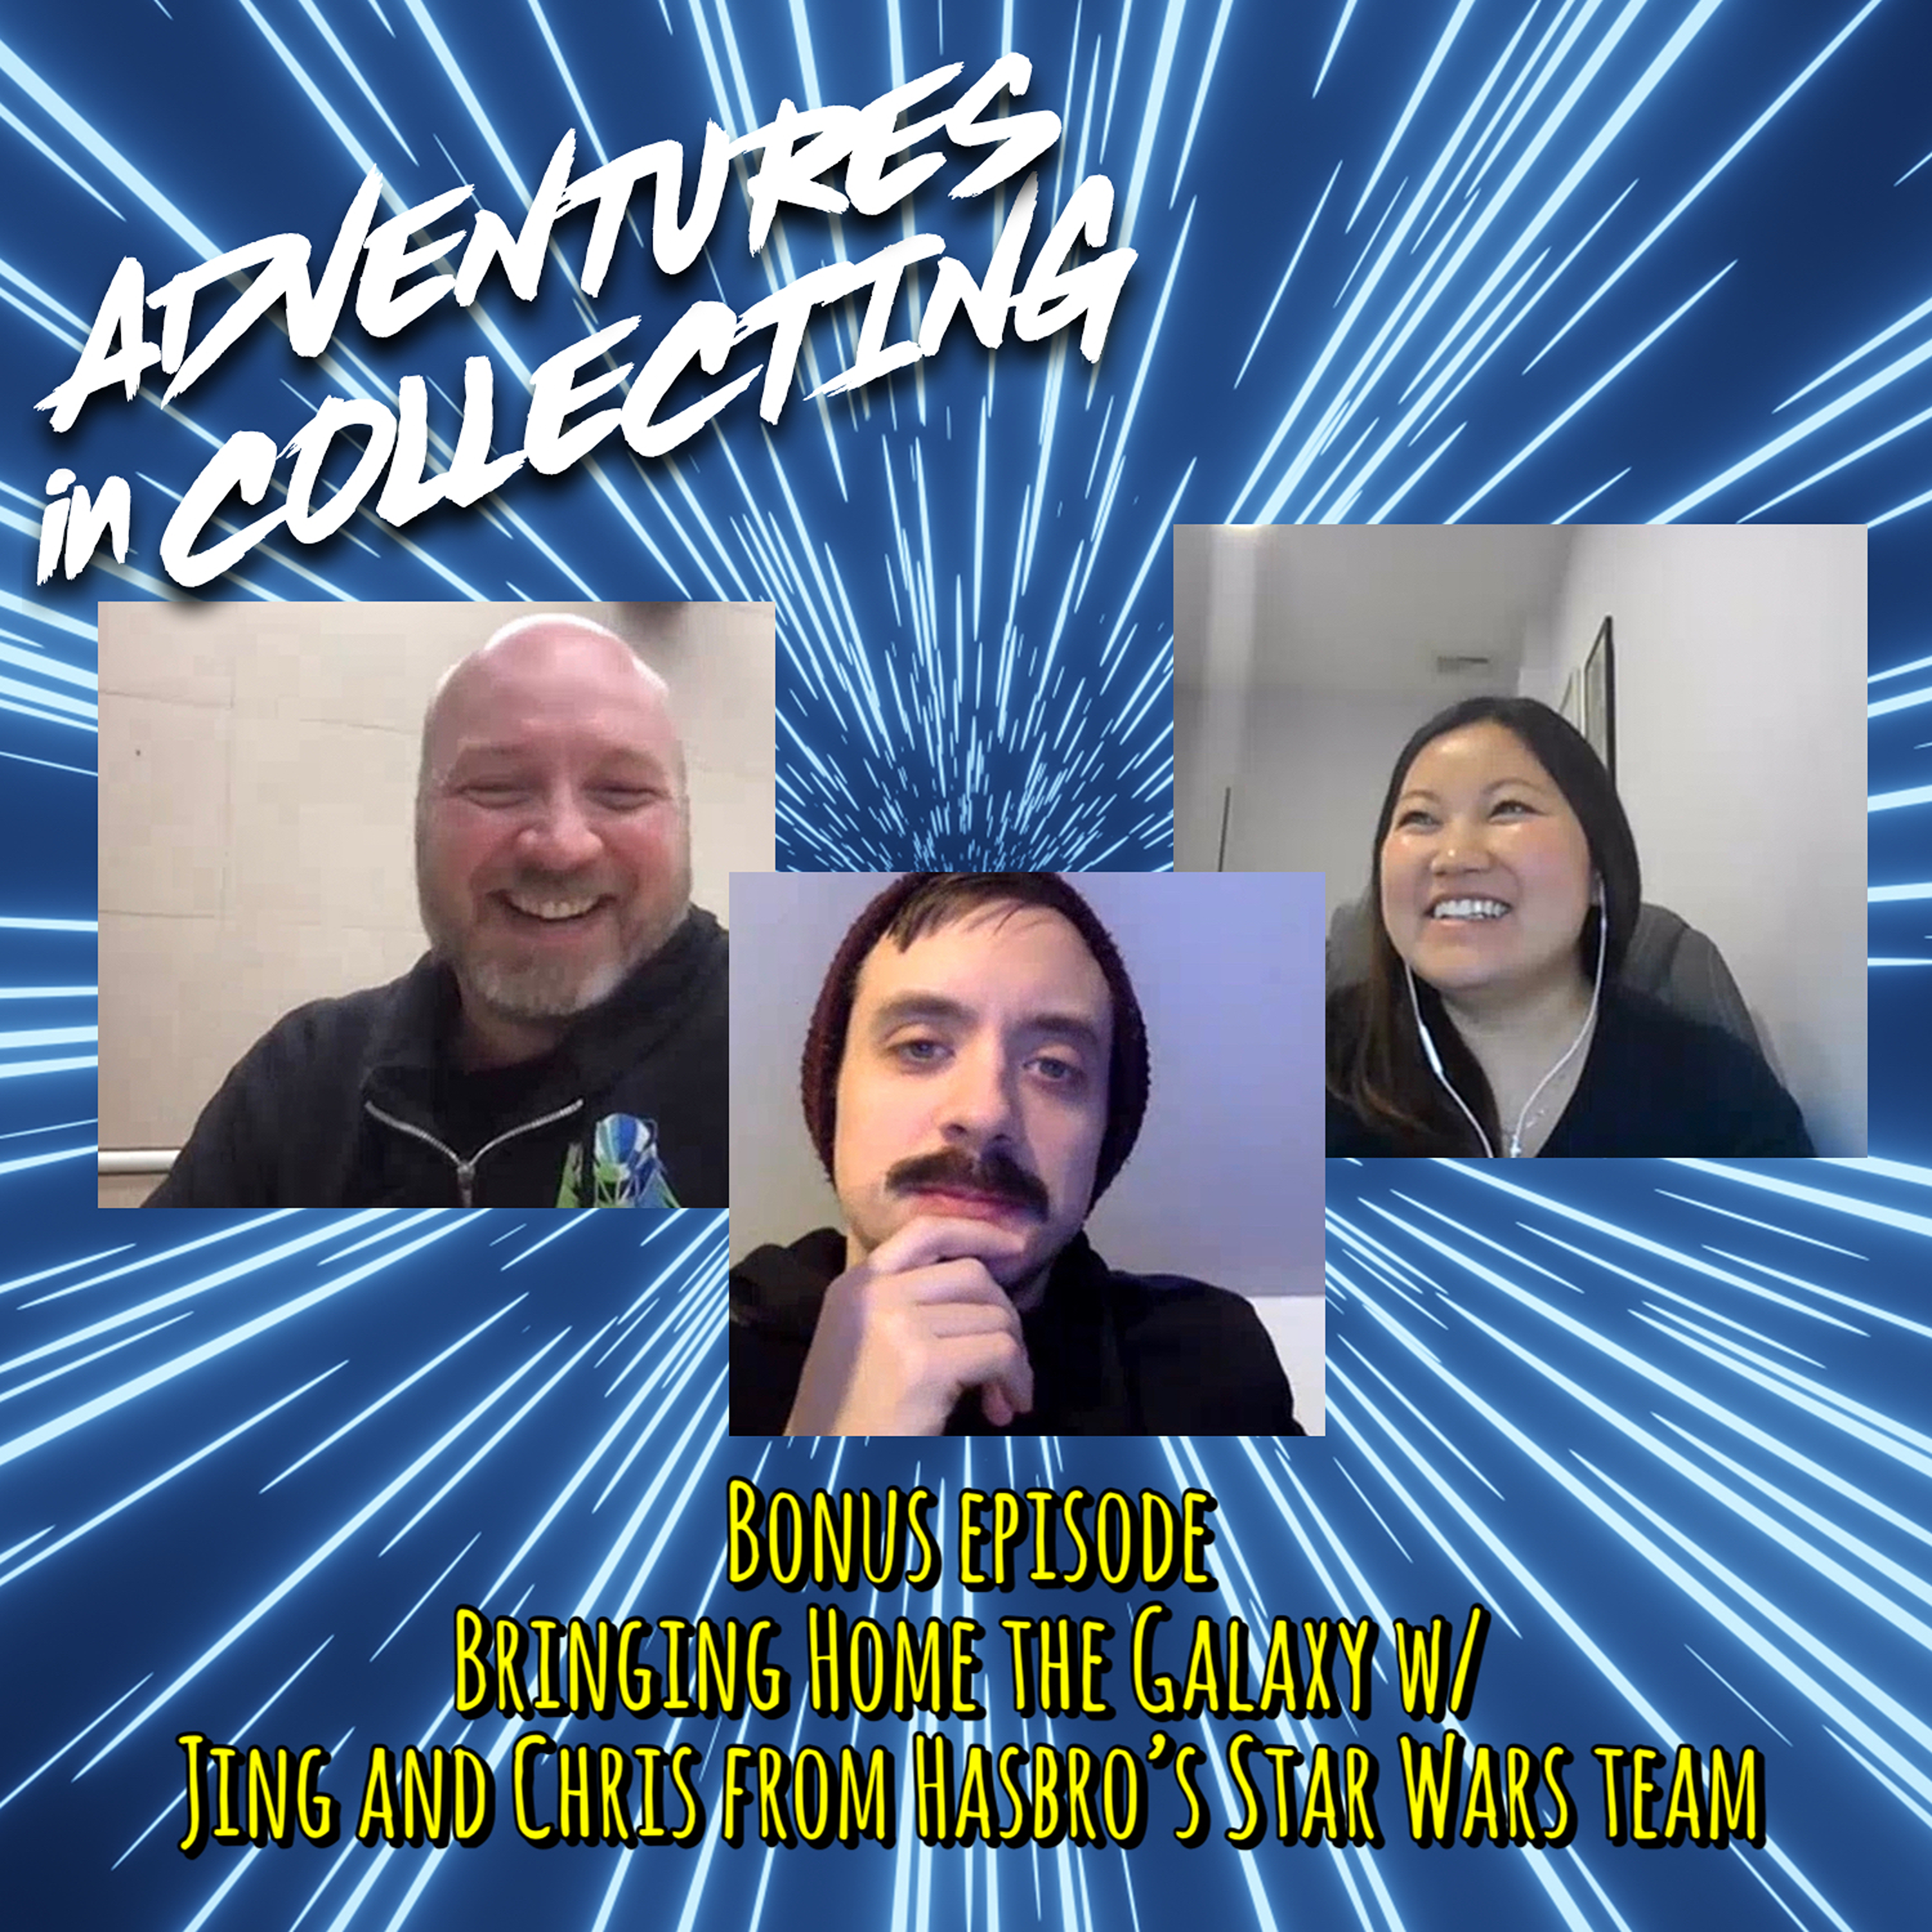 Bringing Home the Galaxy with Jing and Chris from Hasbro’s Star Wars Team